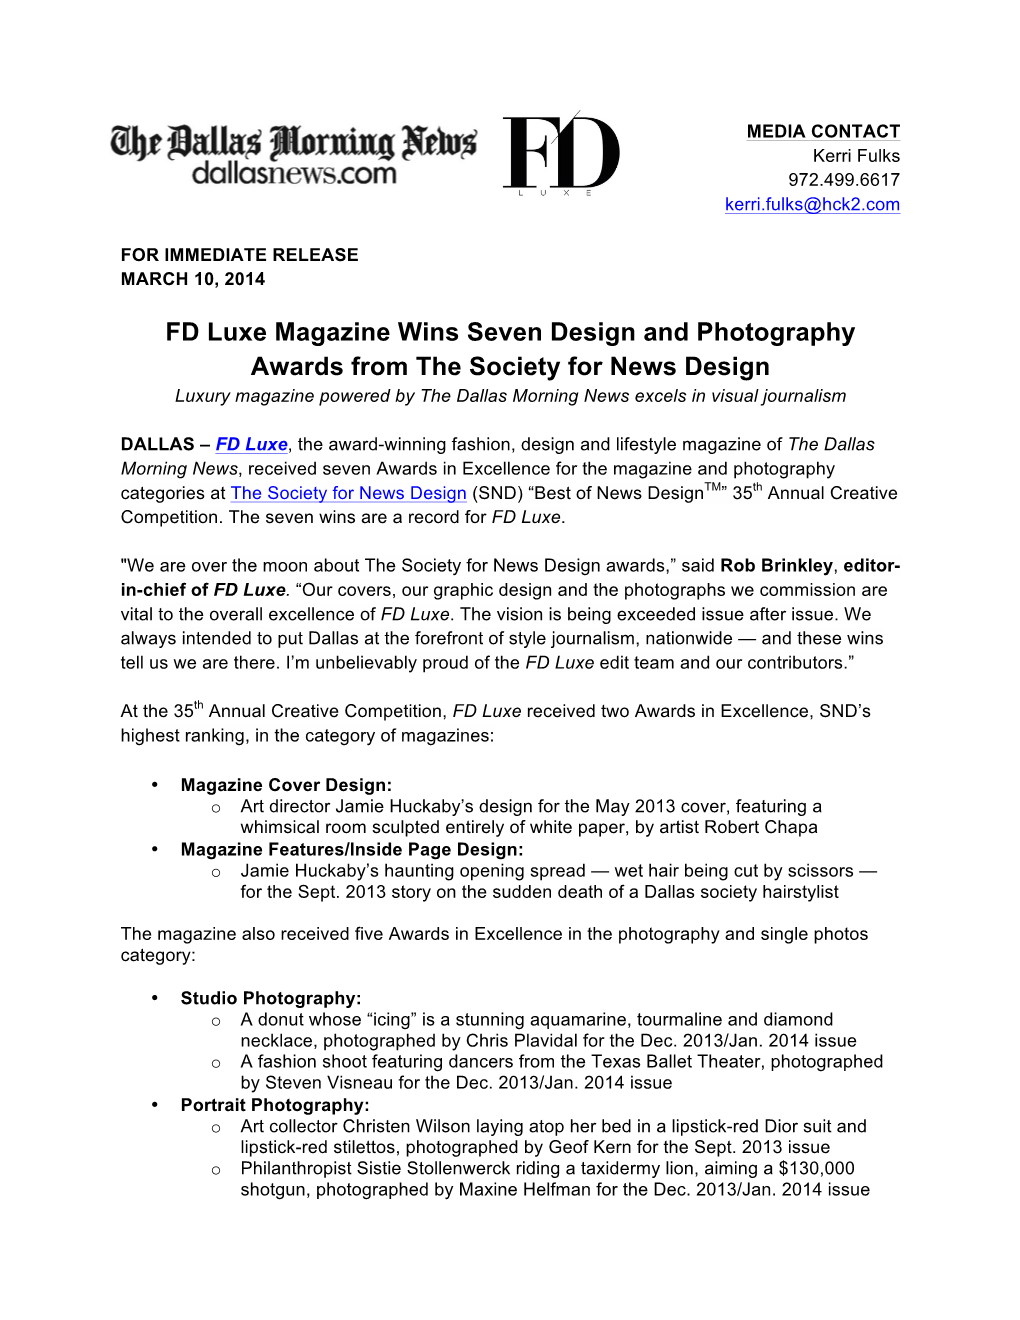 FD Luxe Magazine Wins Seven Design and Photography Awards